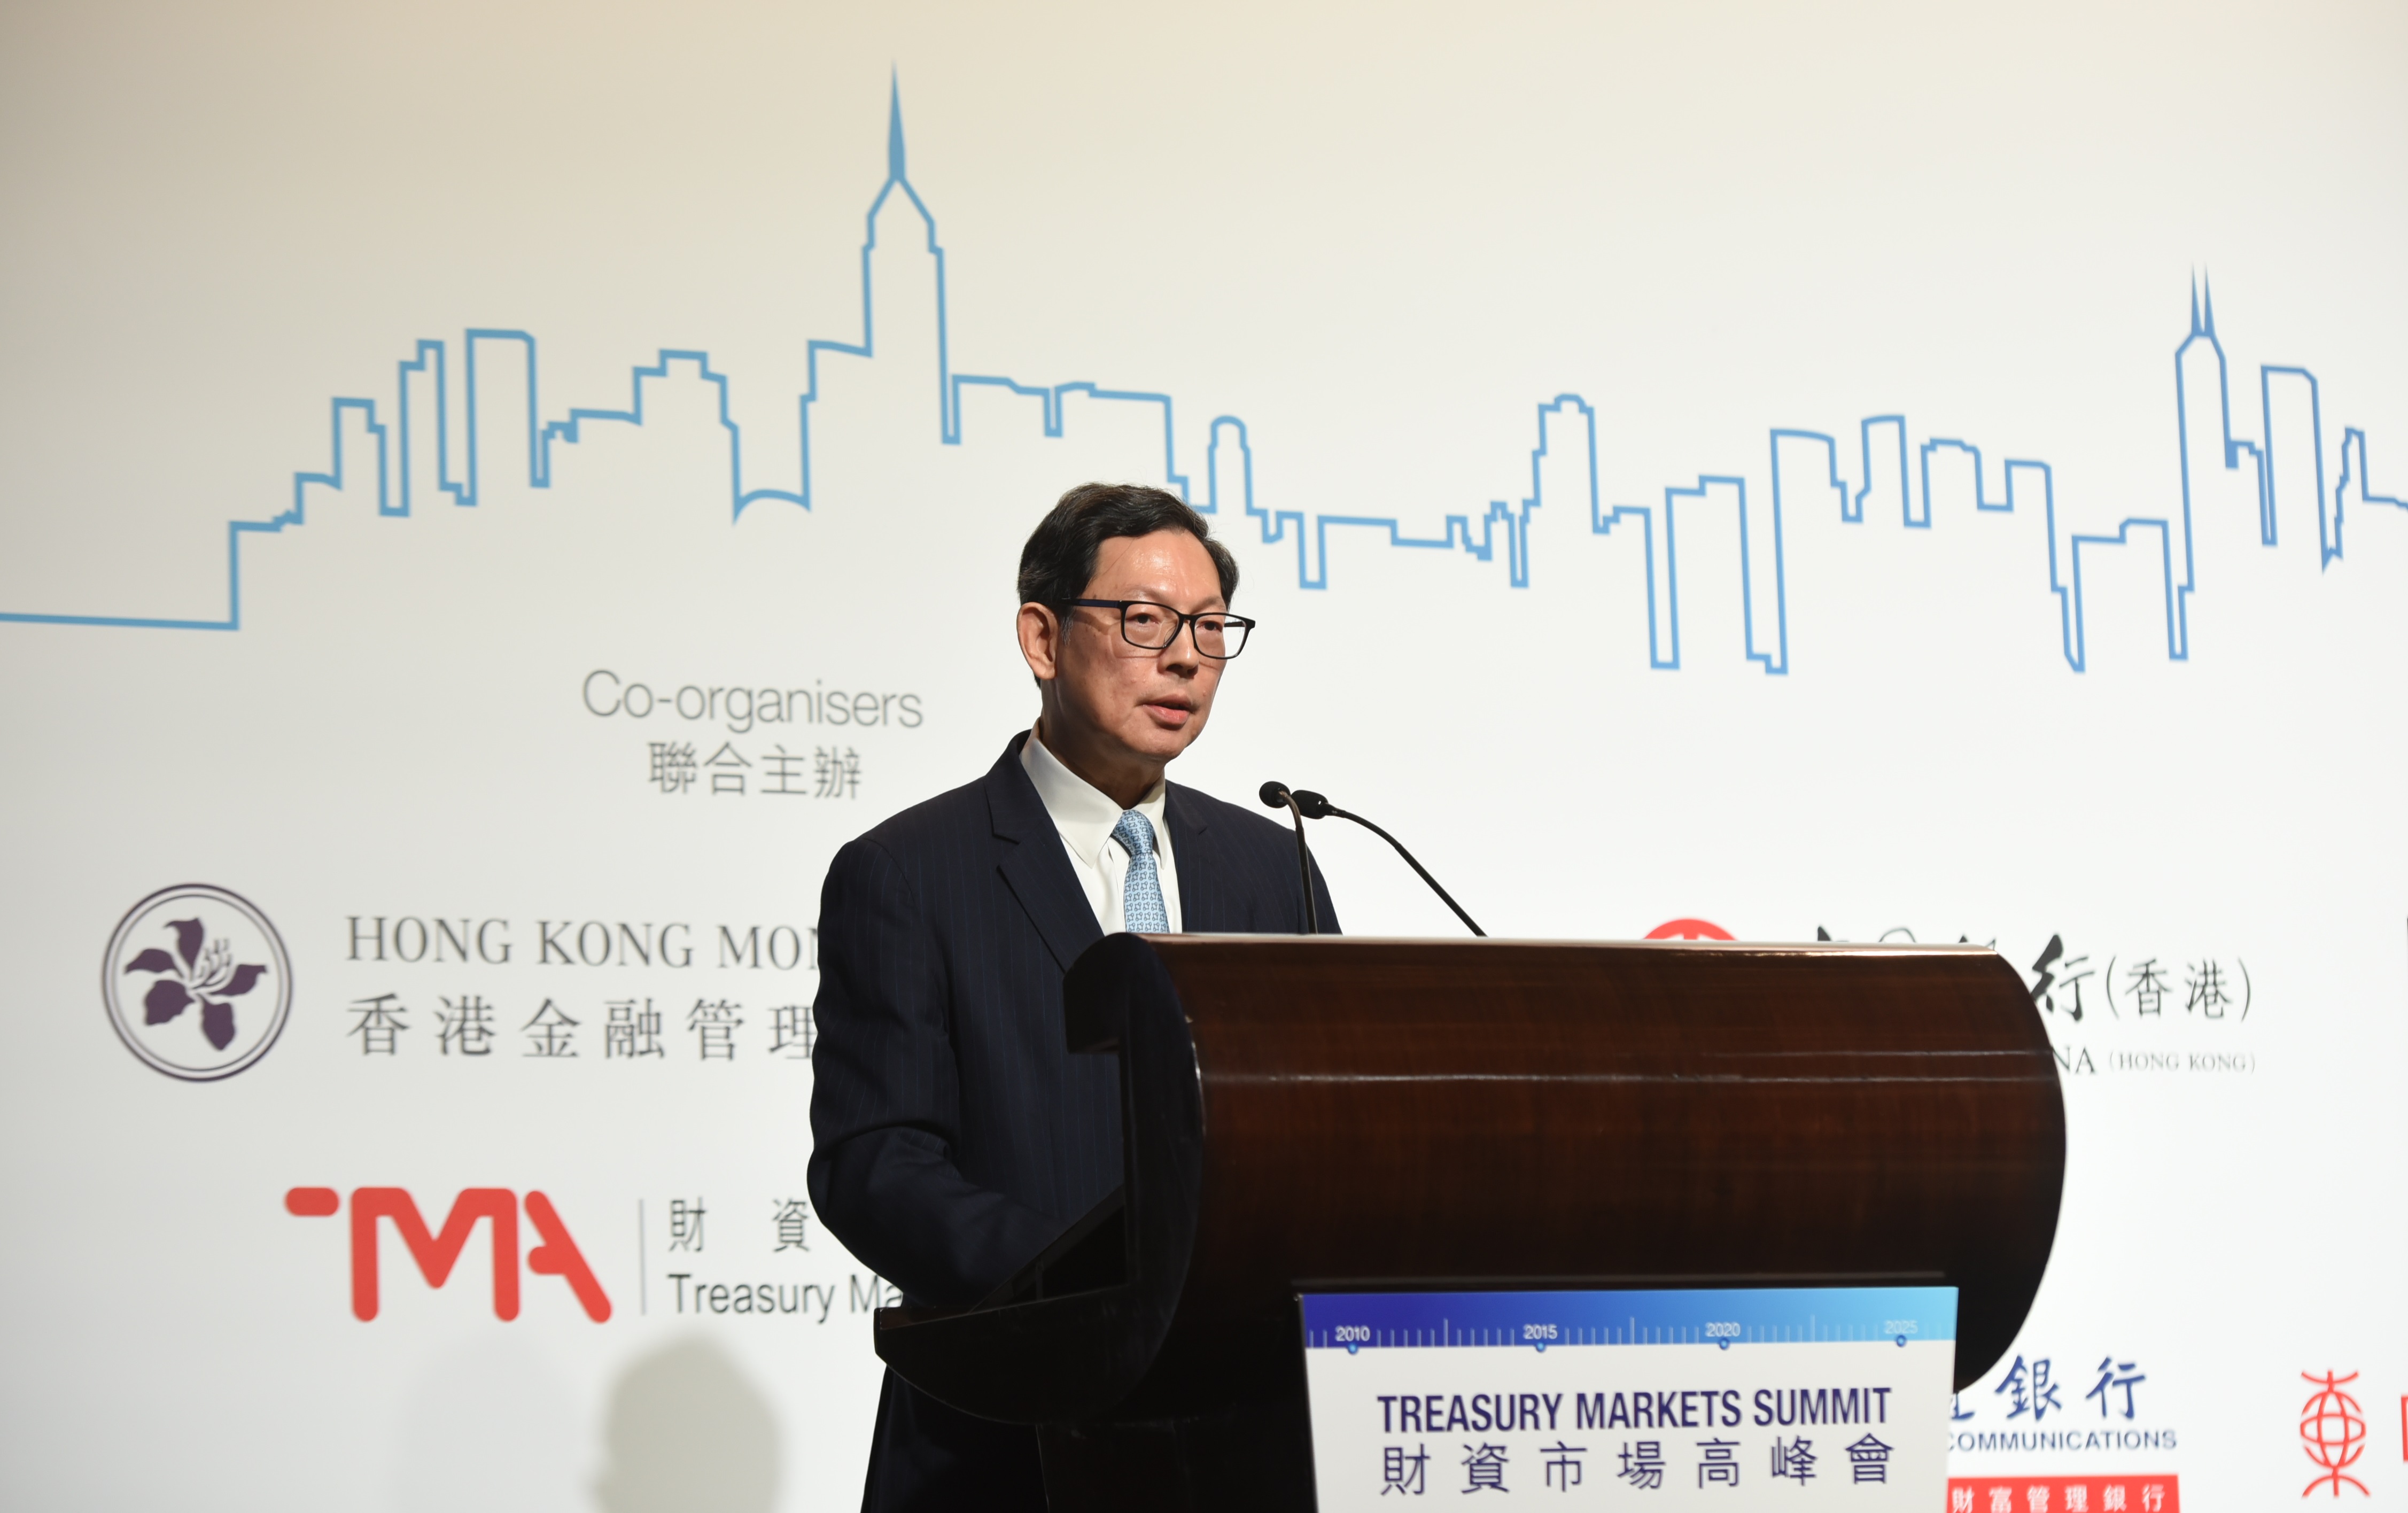 Mr Norman Chan, Chief Executive of the HKMA, gives the welcoming remarks and keynote speech at the Treasury Markets Summit 2019 held in Hong Kong.